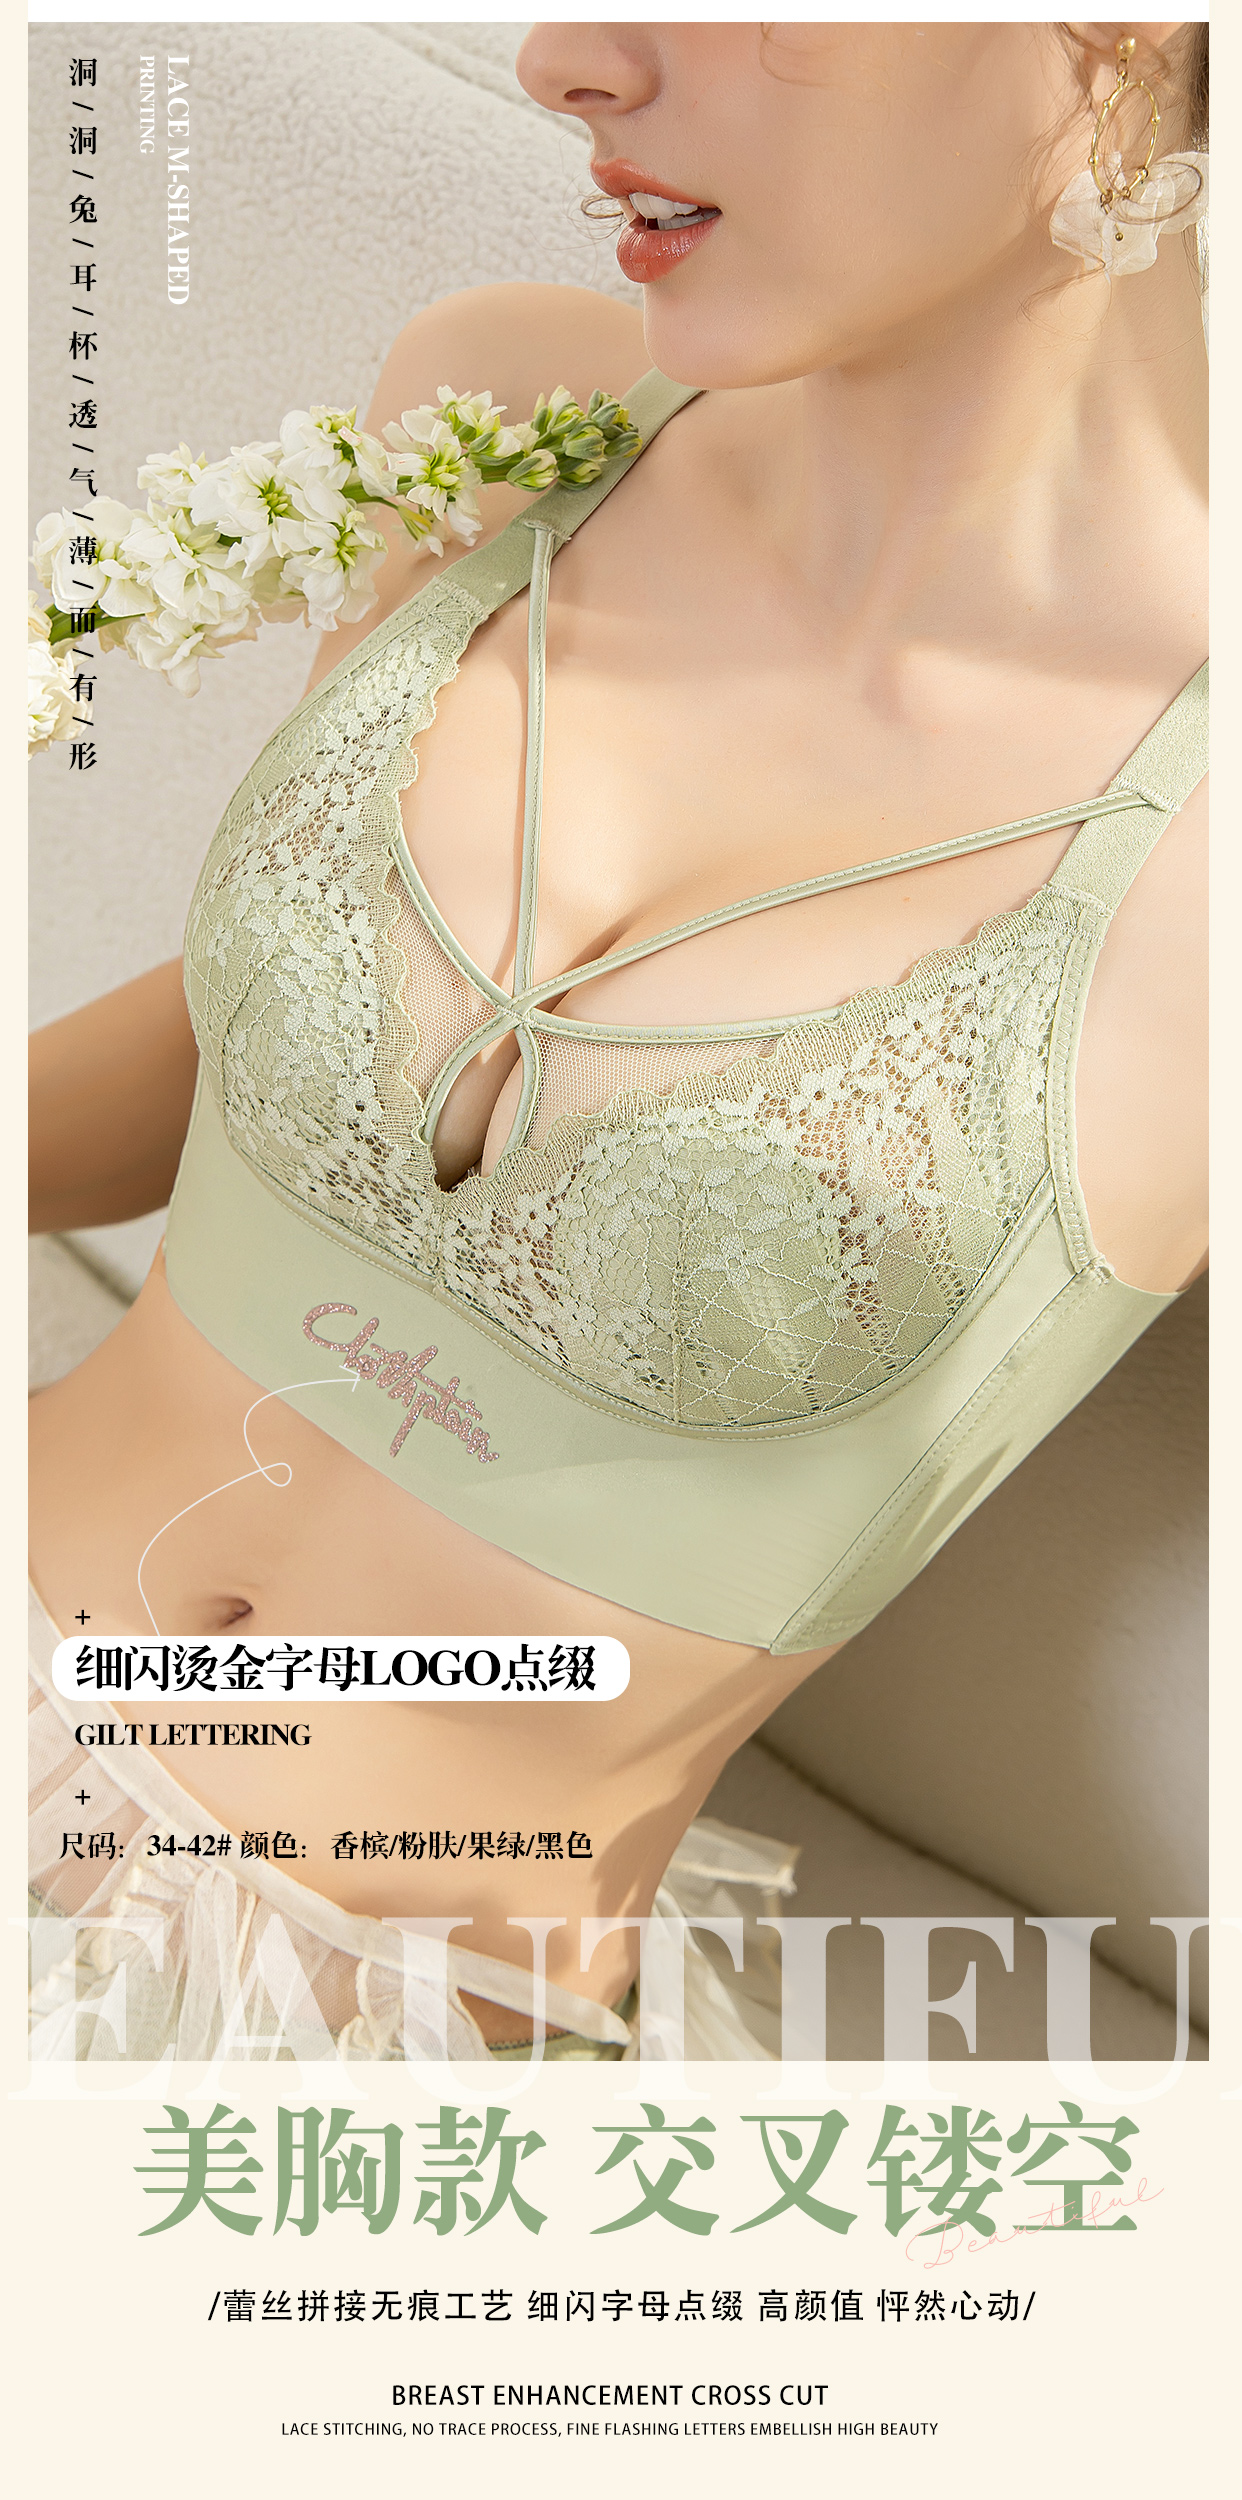 Rabbit Ears Cup Lace Underwear Ultra Slim large chest display slim pure desire anti-bump without steel ring bra suit-Taobao